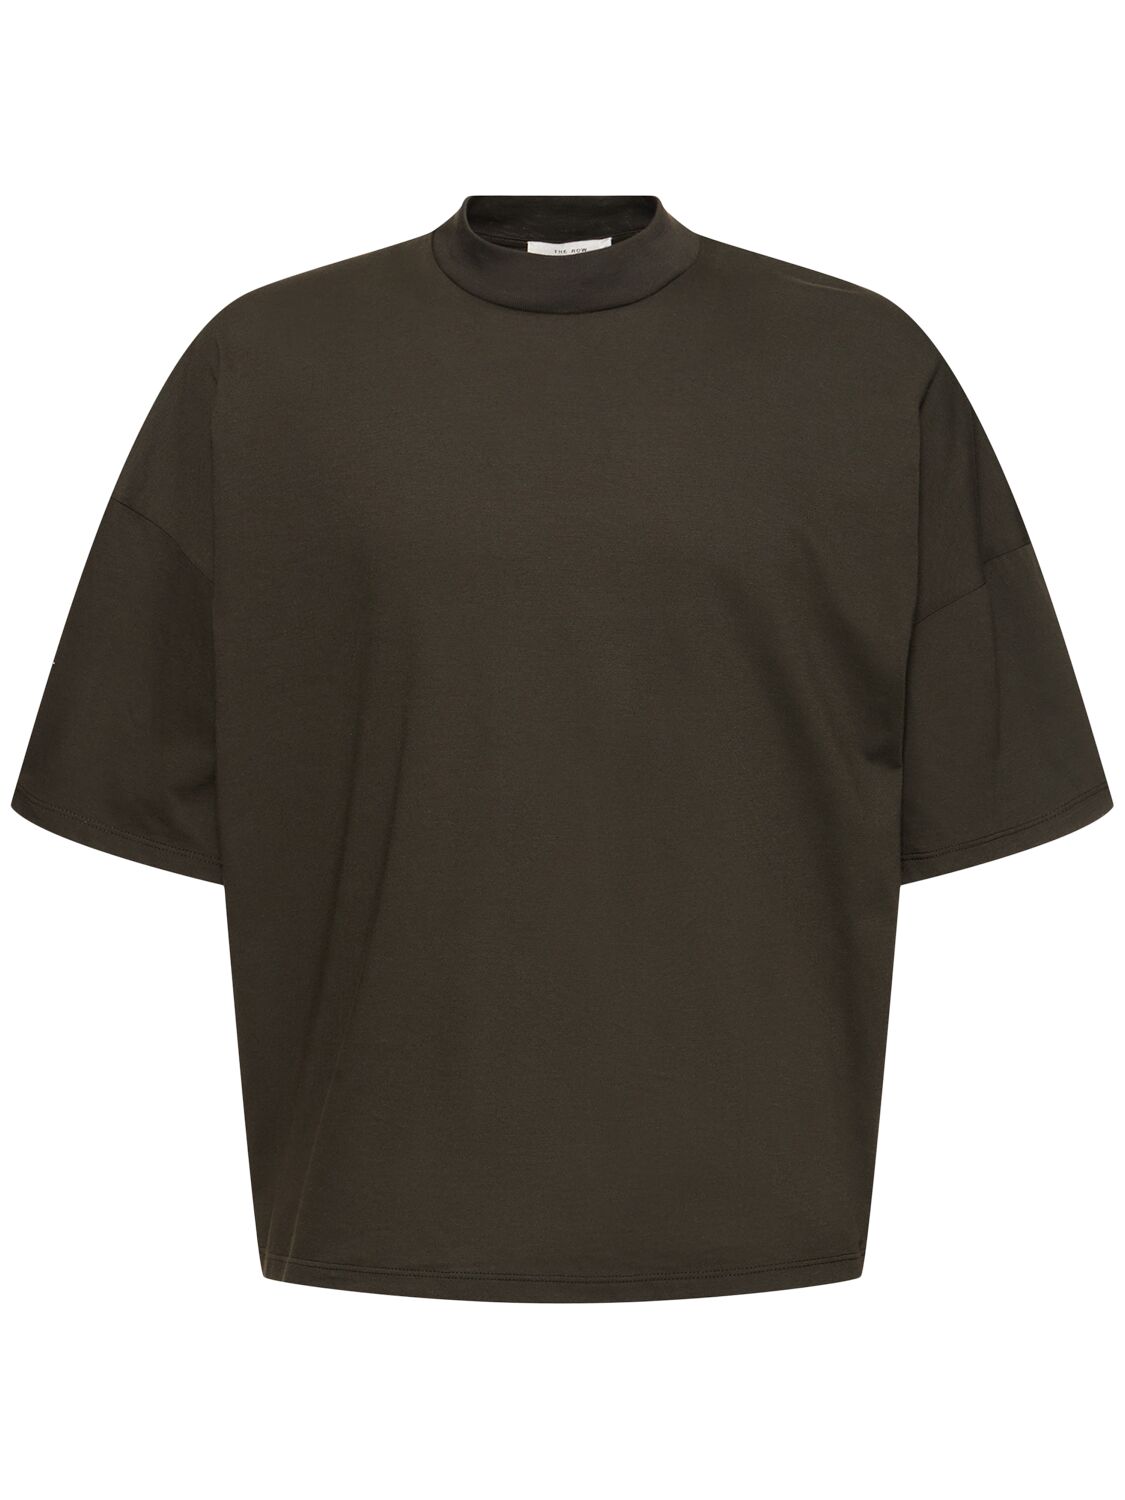 Image of Dustin Cotton Jersey T-shirt